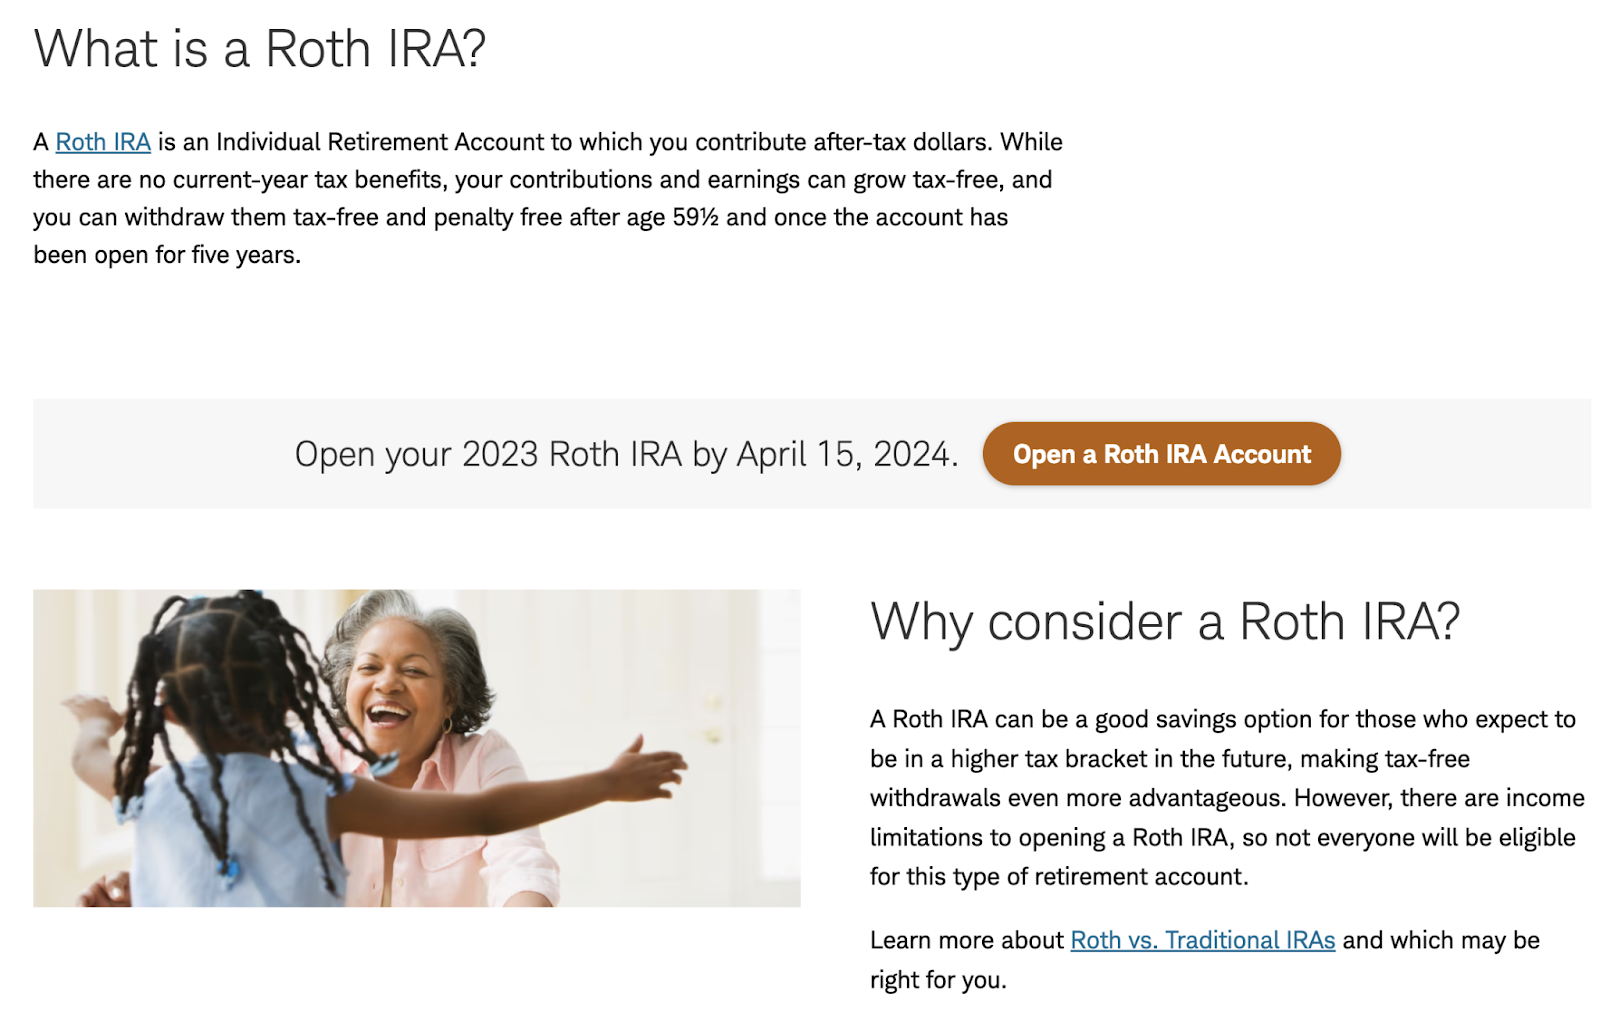 “what is a Roth IRA” and “why consider a Roth IRA